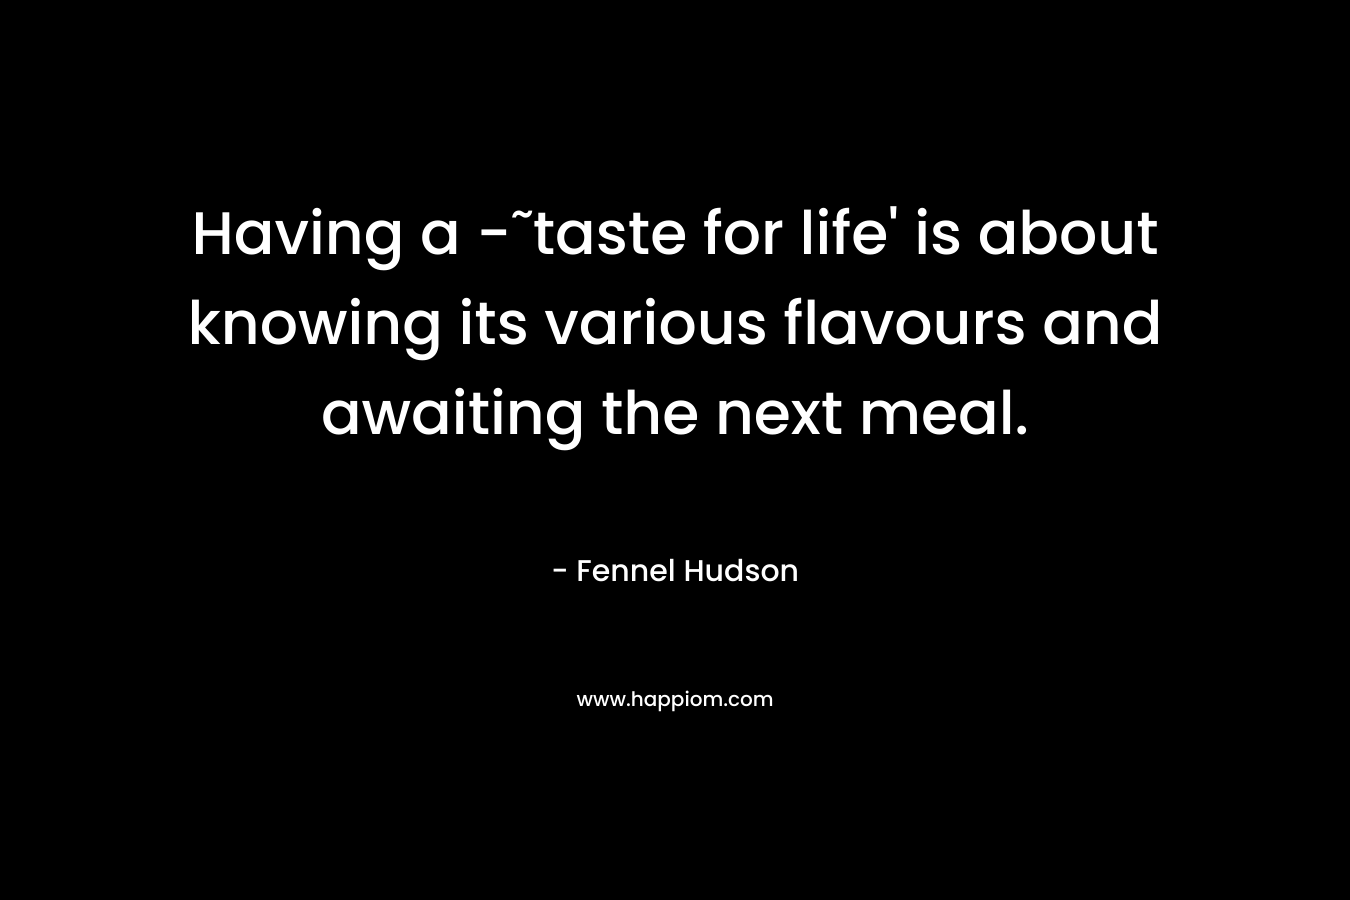 Having a -˜taste for life' is about knowing its various flavours and awaiting the next meal.